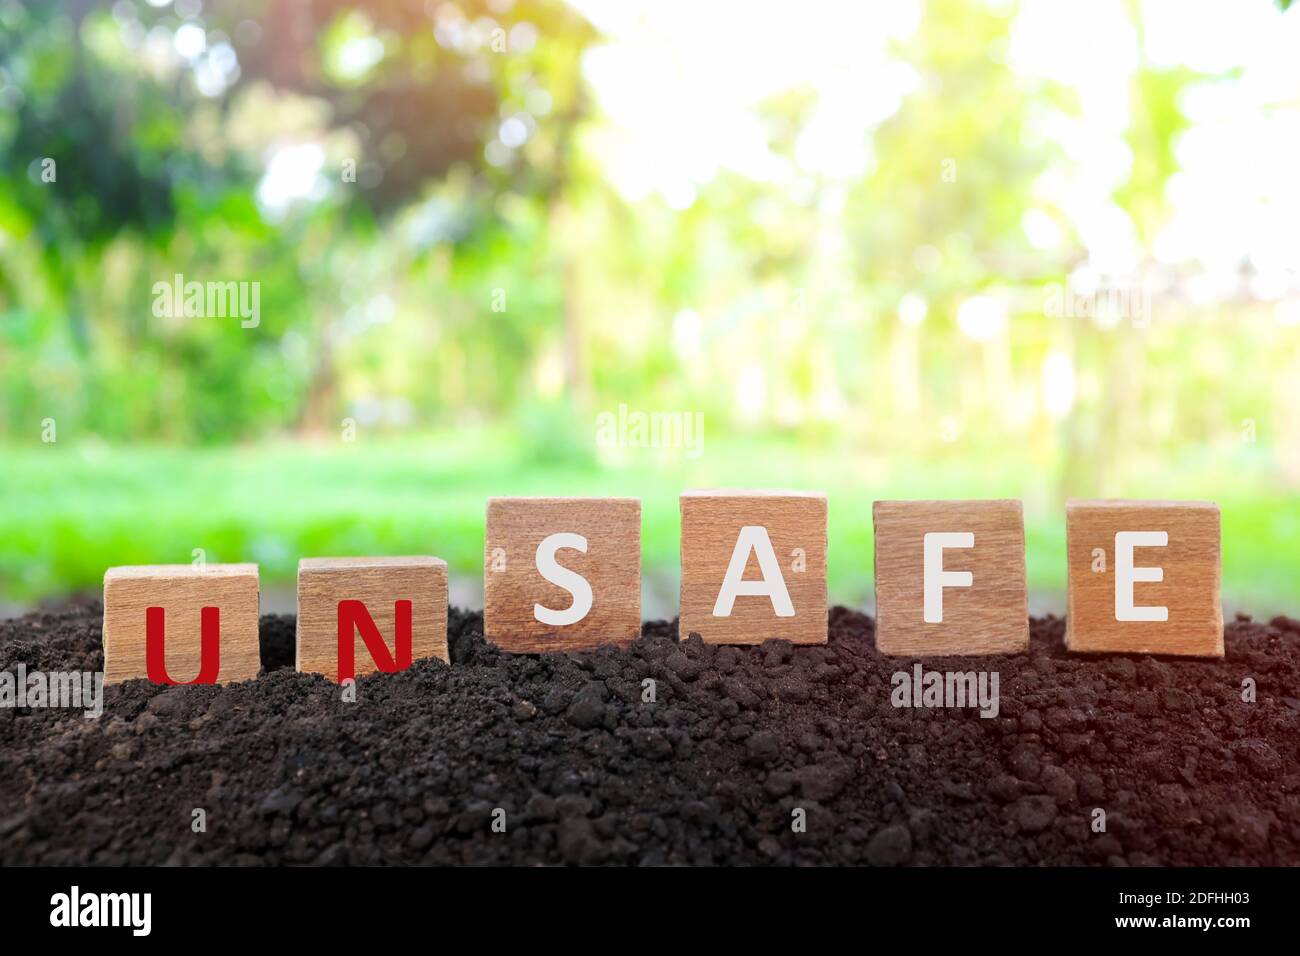 Hand changing word unsafe to safe in wooden blocks on natural background. Safety on workplace and precautionary safe acts to prevent accident concept Stock Photo